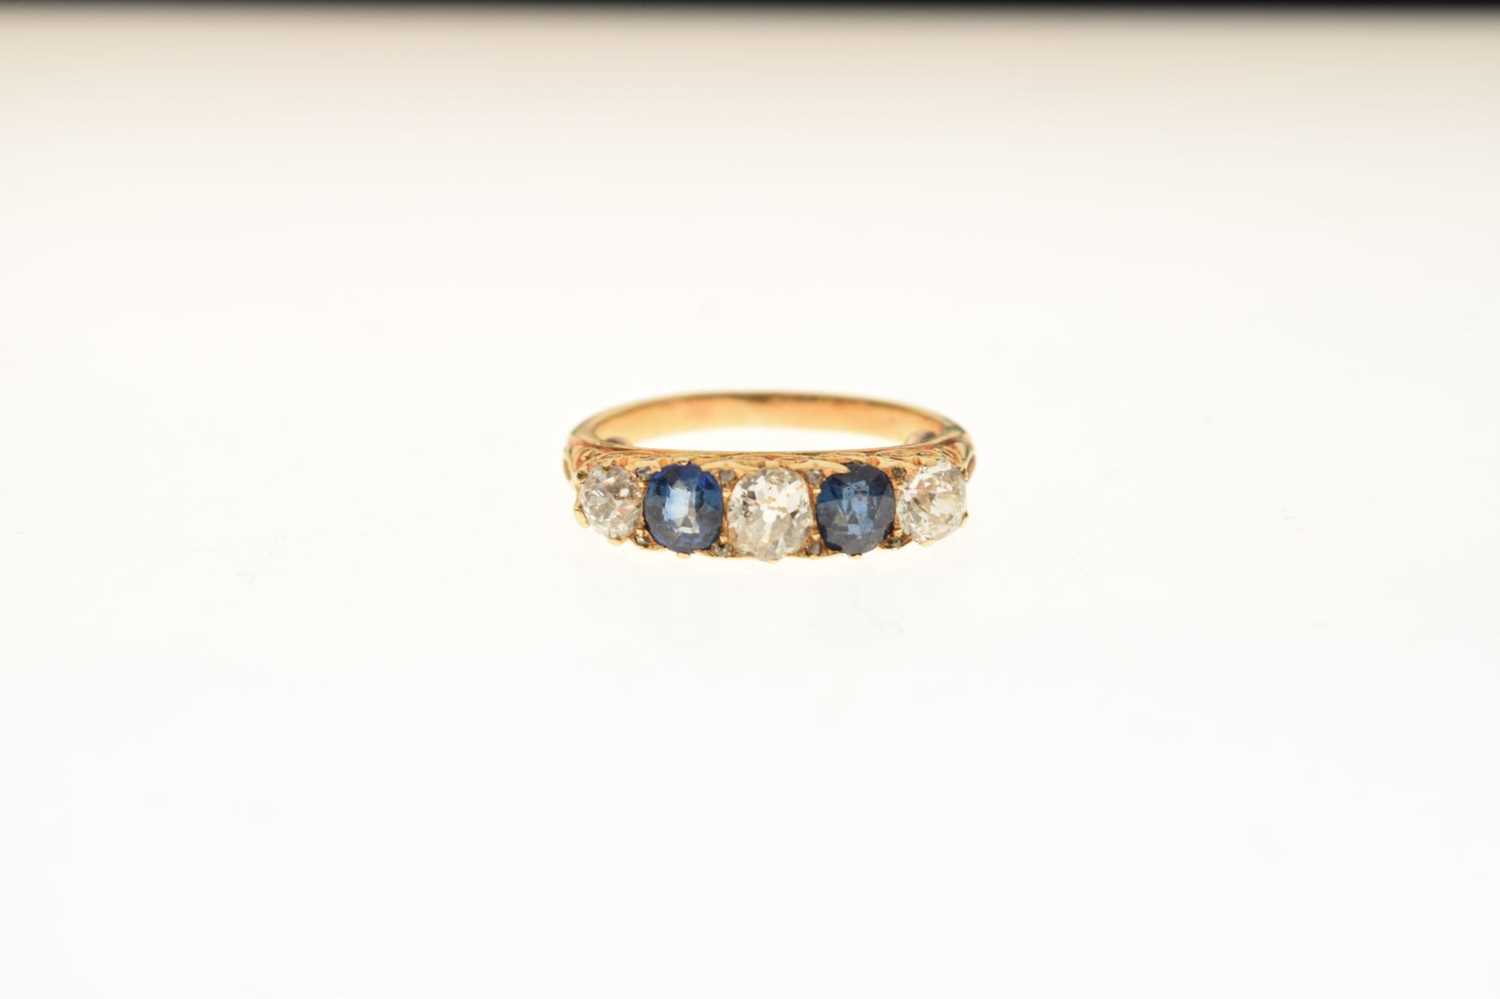 Five-stone diamond and sapphire ring - Image 2 of 6